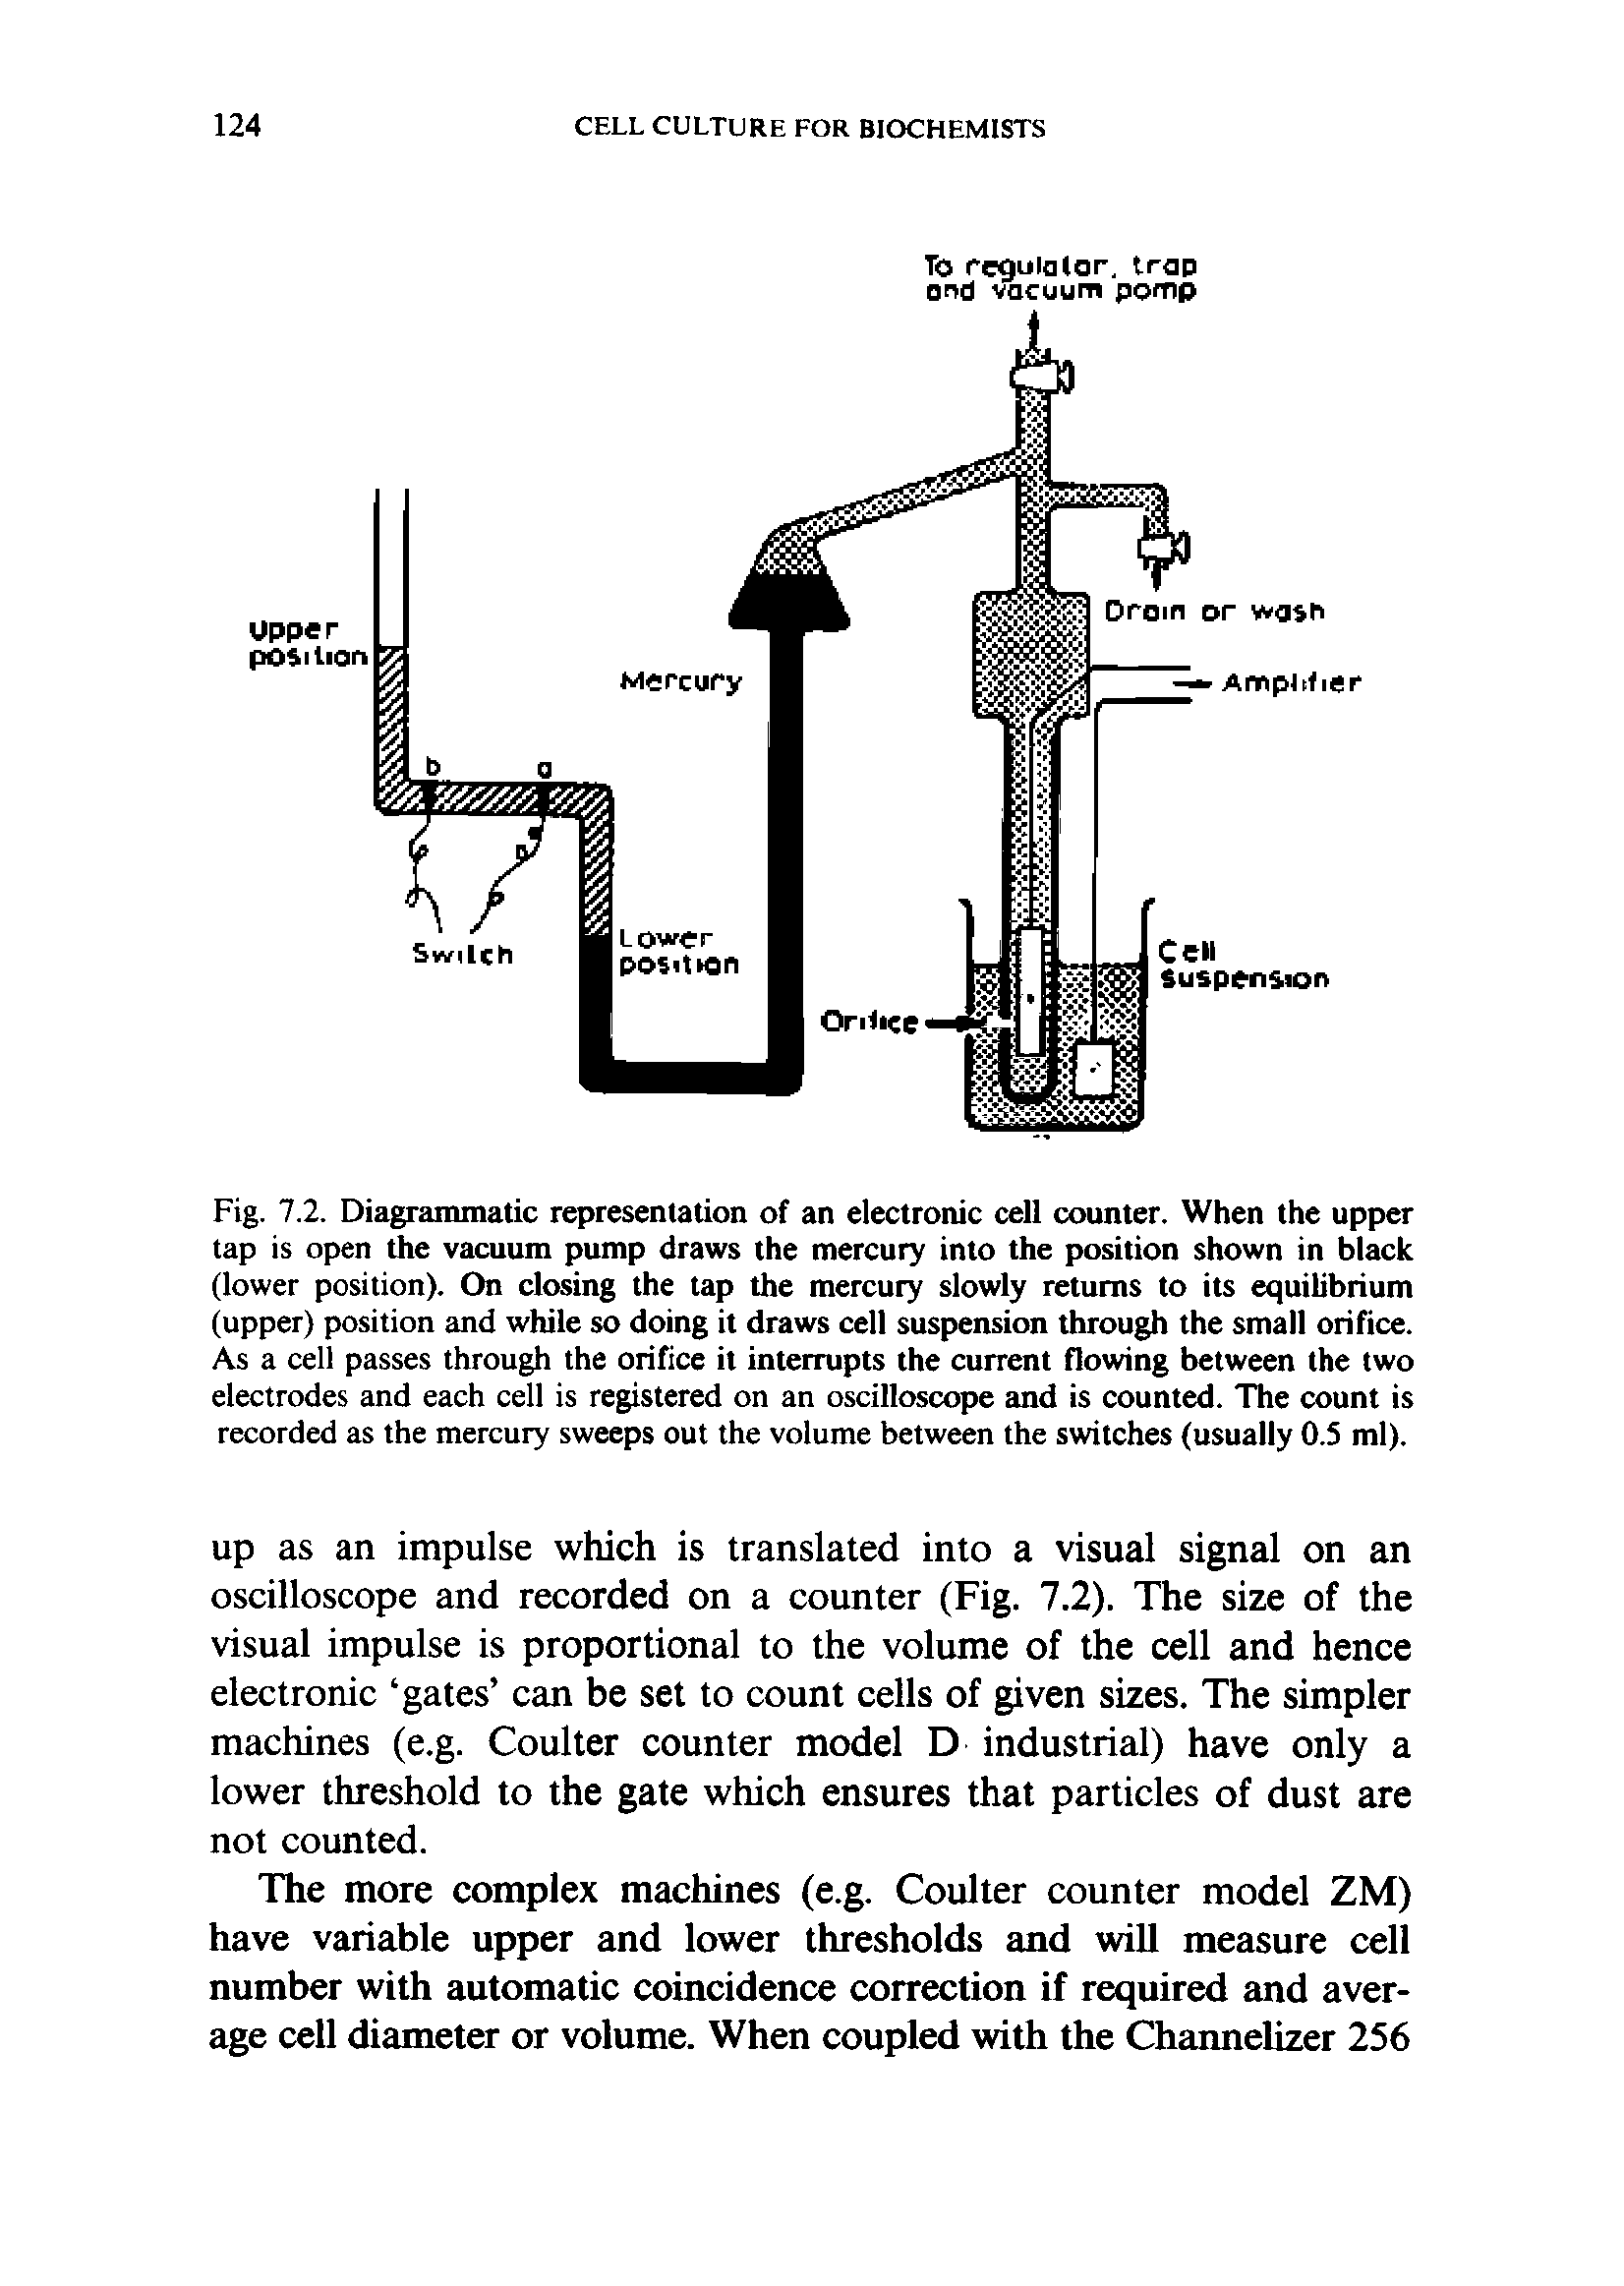 Fig. 7.2. Diagrammatic representation of an electronic cell counter. When the upper tap is open the vacuum pump draws the mercury into the position shown in black (lower position). On closing the tap the mercury slowly returns to its equilibrium (upper) position and while so doing it draws cell suspension through the small orifice. As a cell passes through the orifice it interrupts the current flowing between the two electrodes and each cell is registered on an oscilloscope and is counted. The count is recorded as the mercury sweeps out the volume between the switches (usually 0.5 ml).